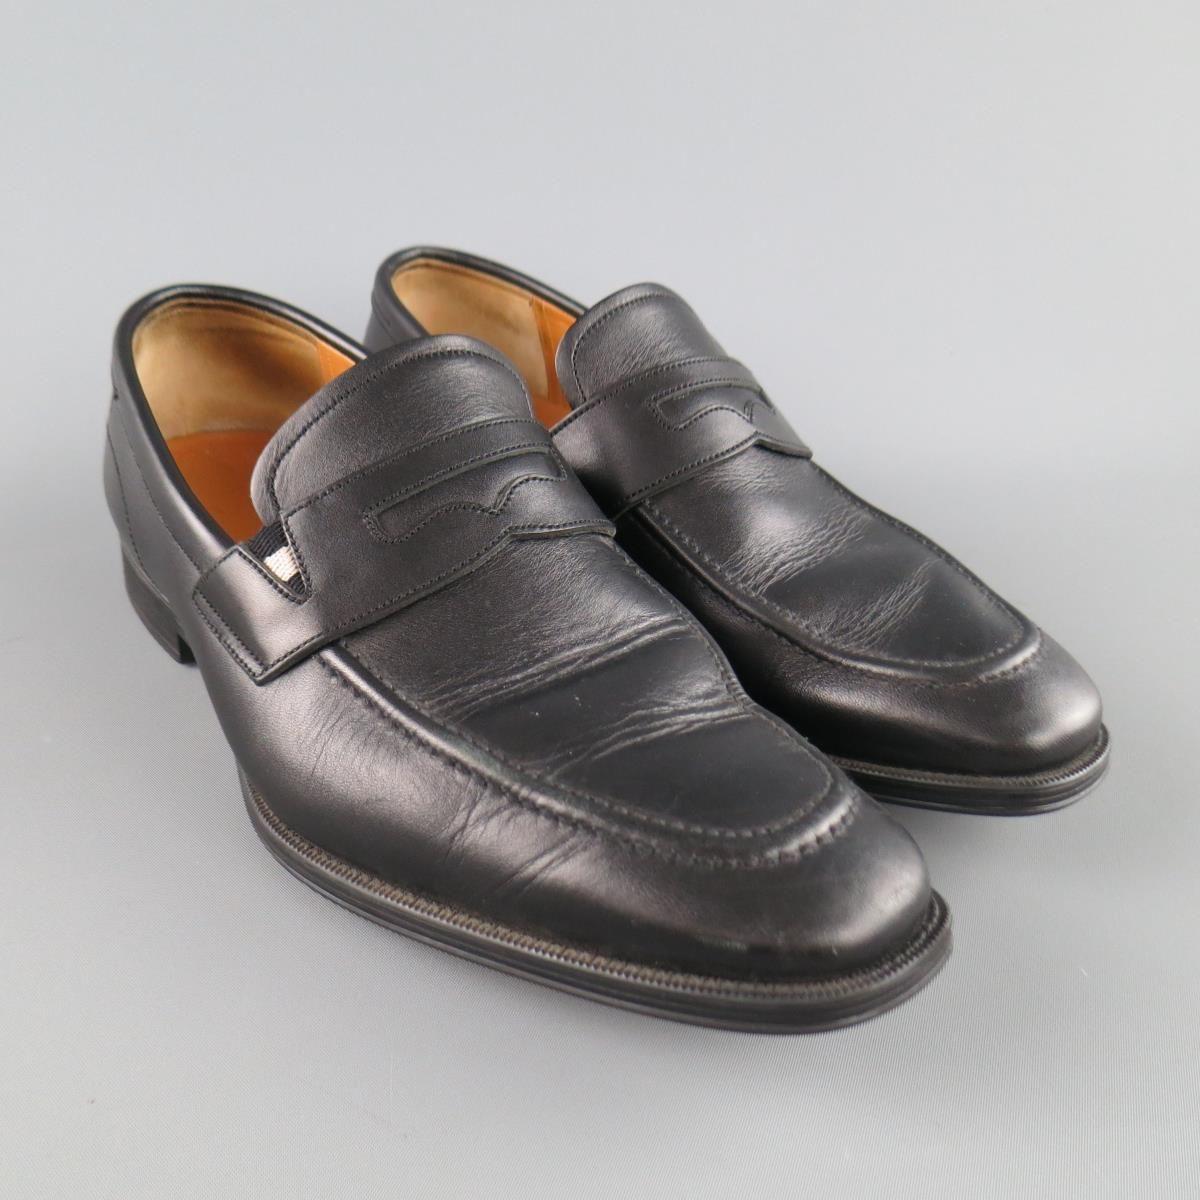 BALLY penny loafers come in black smooth leather and feature an apron tow and penny strap with striped elastic detail. with Box. Made in Switzerland.

Excellent Pre-Owned Condition.

Marked: 7.5

Outsole: 11.5 x 4 in.